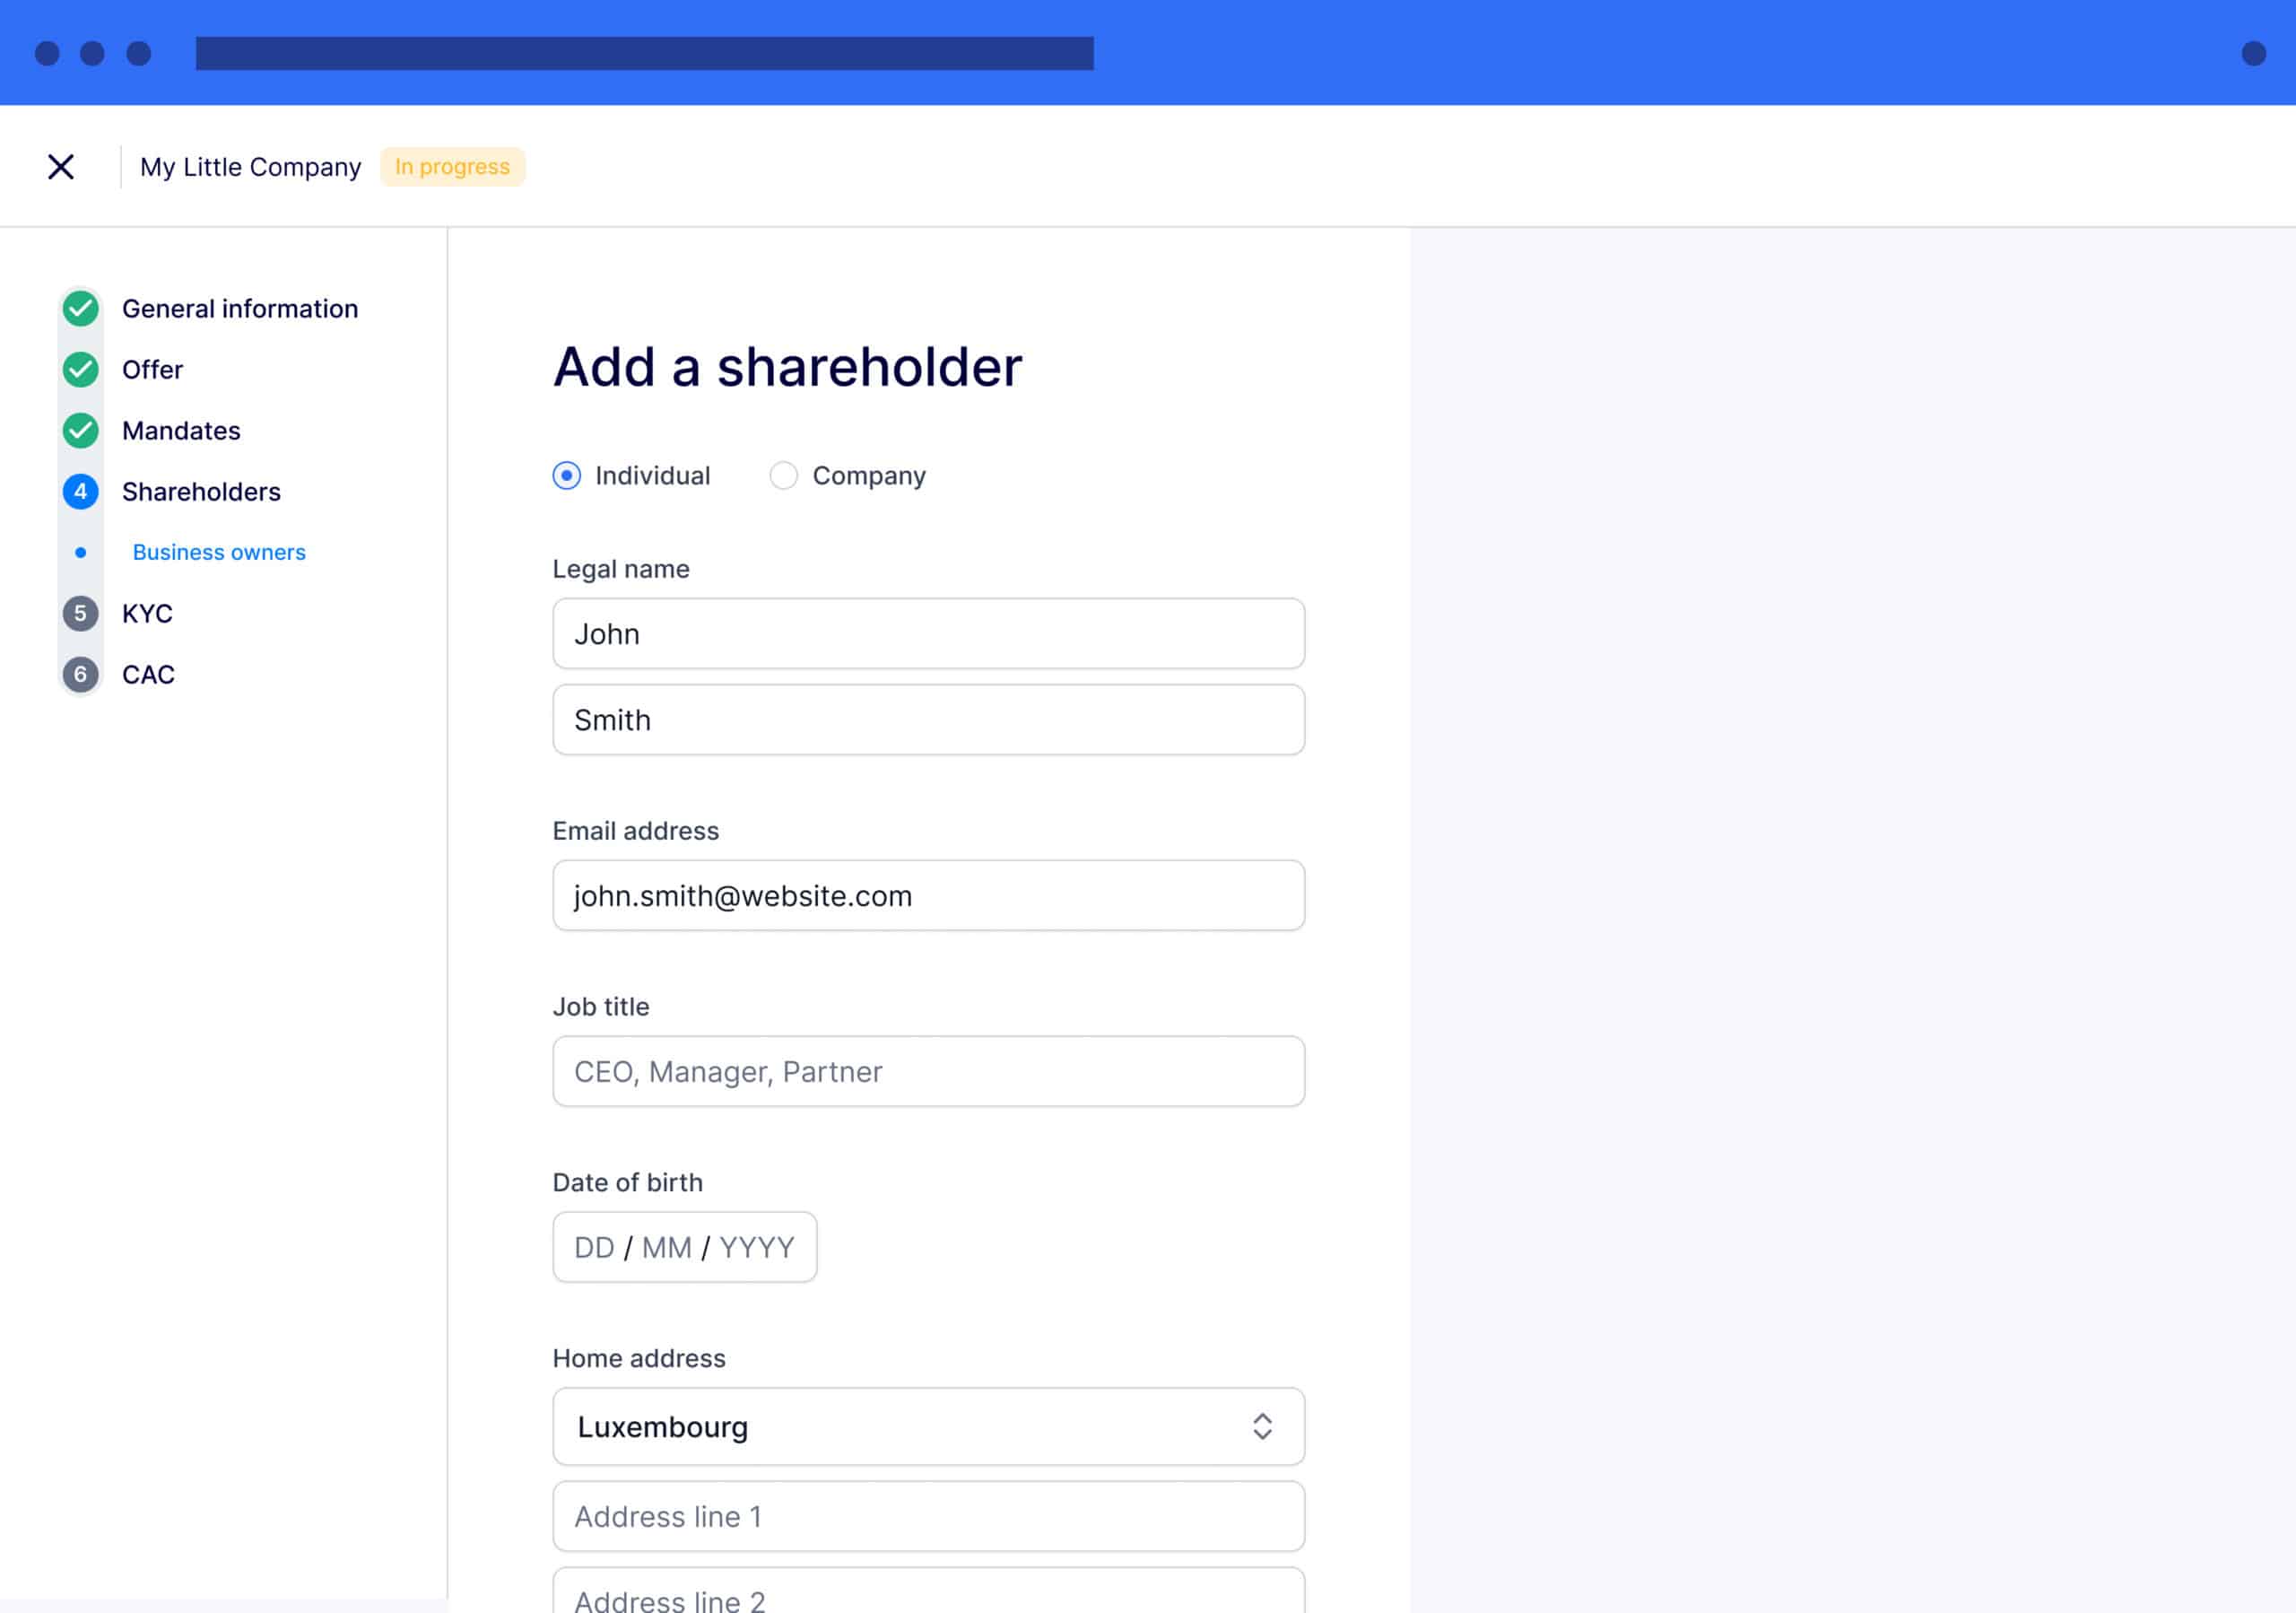 New Onboarding - Step 4 - Add